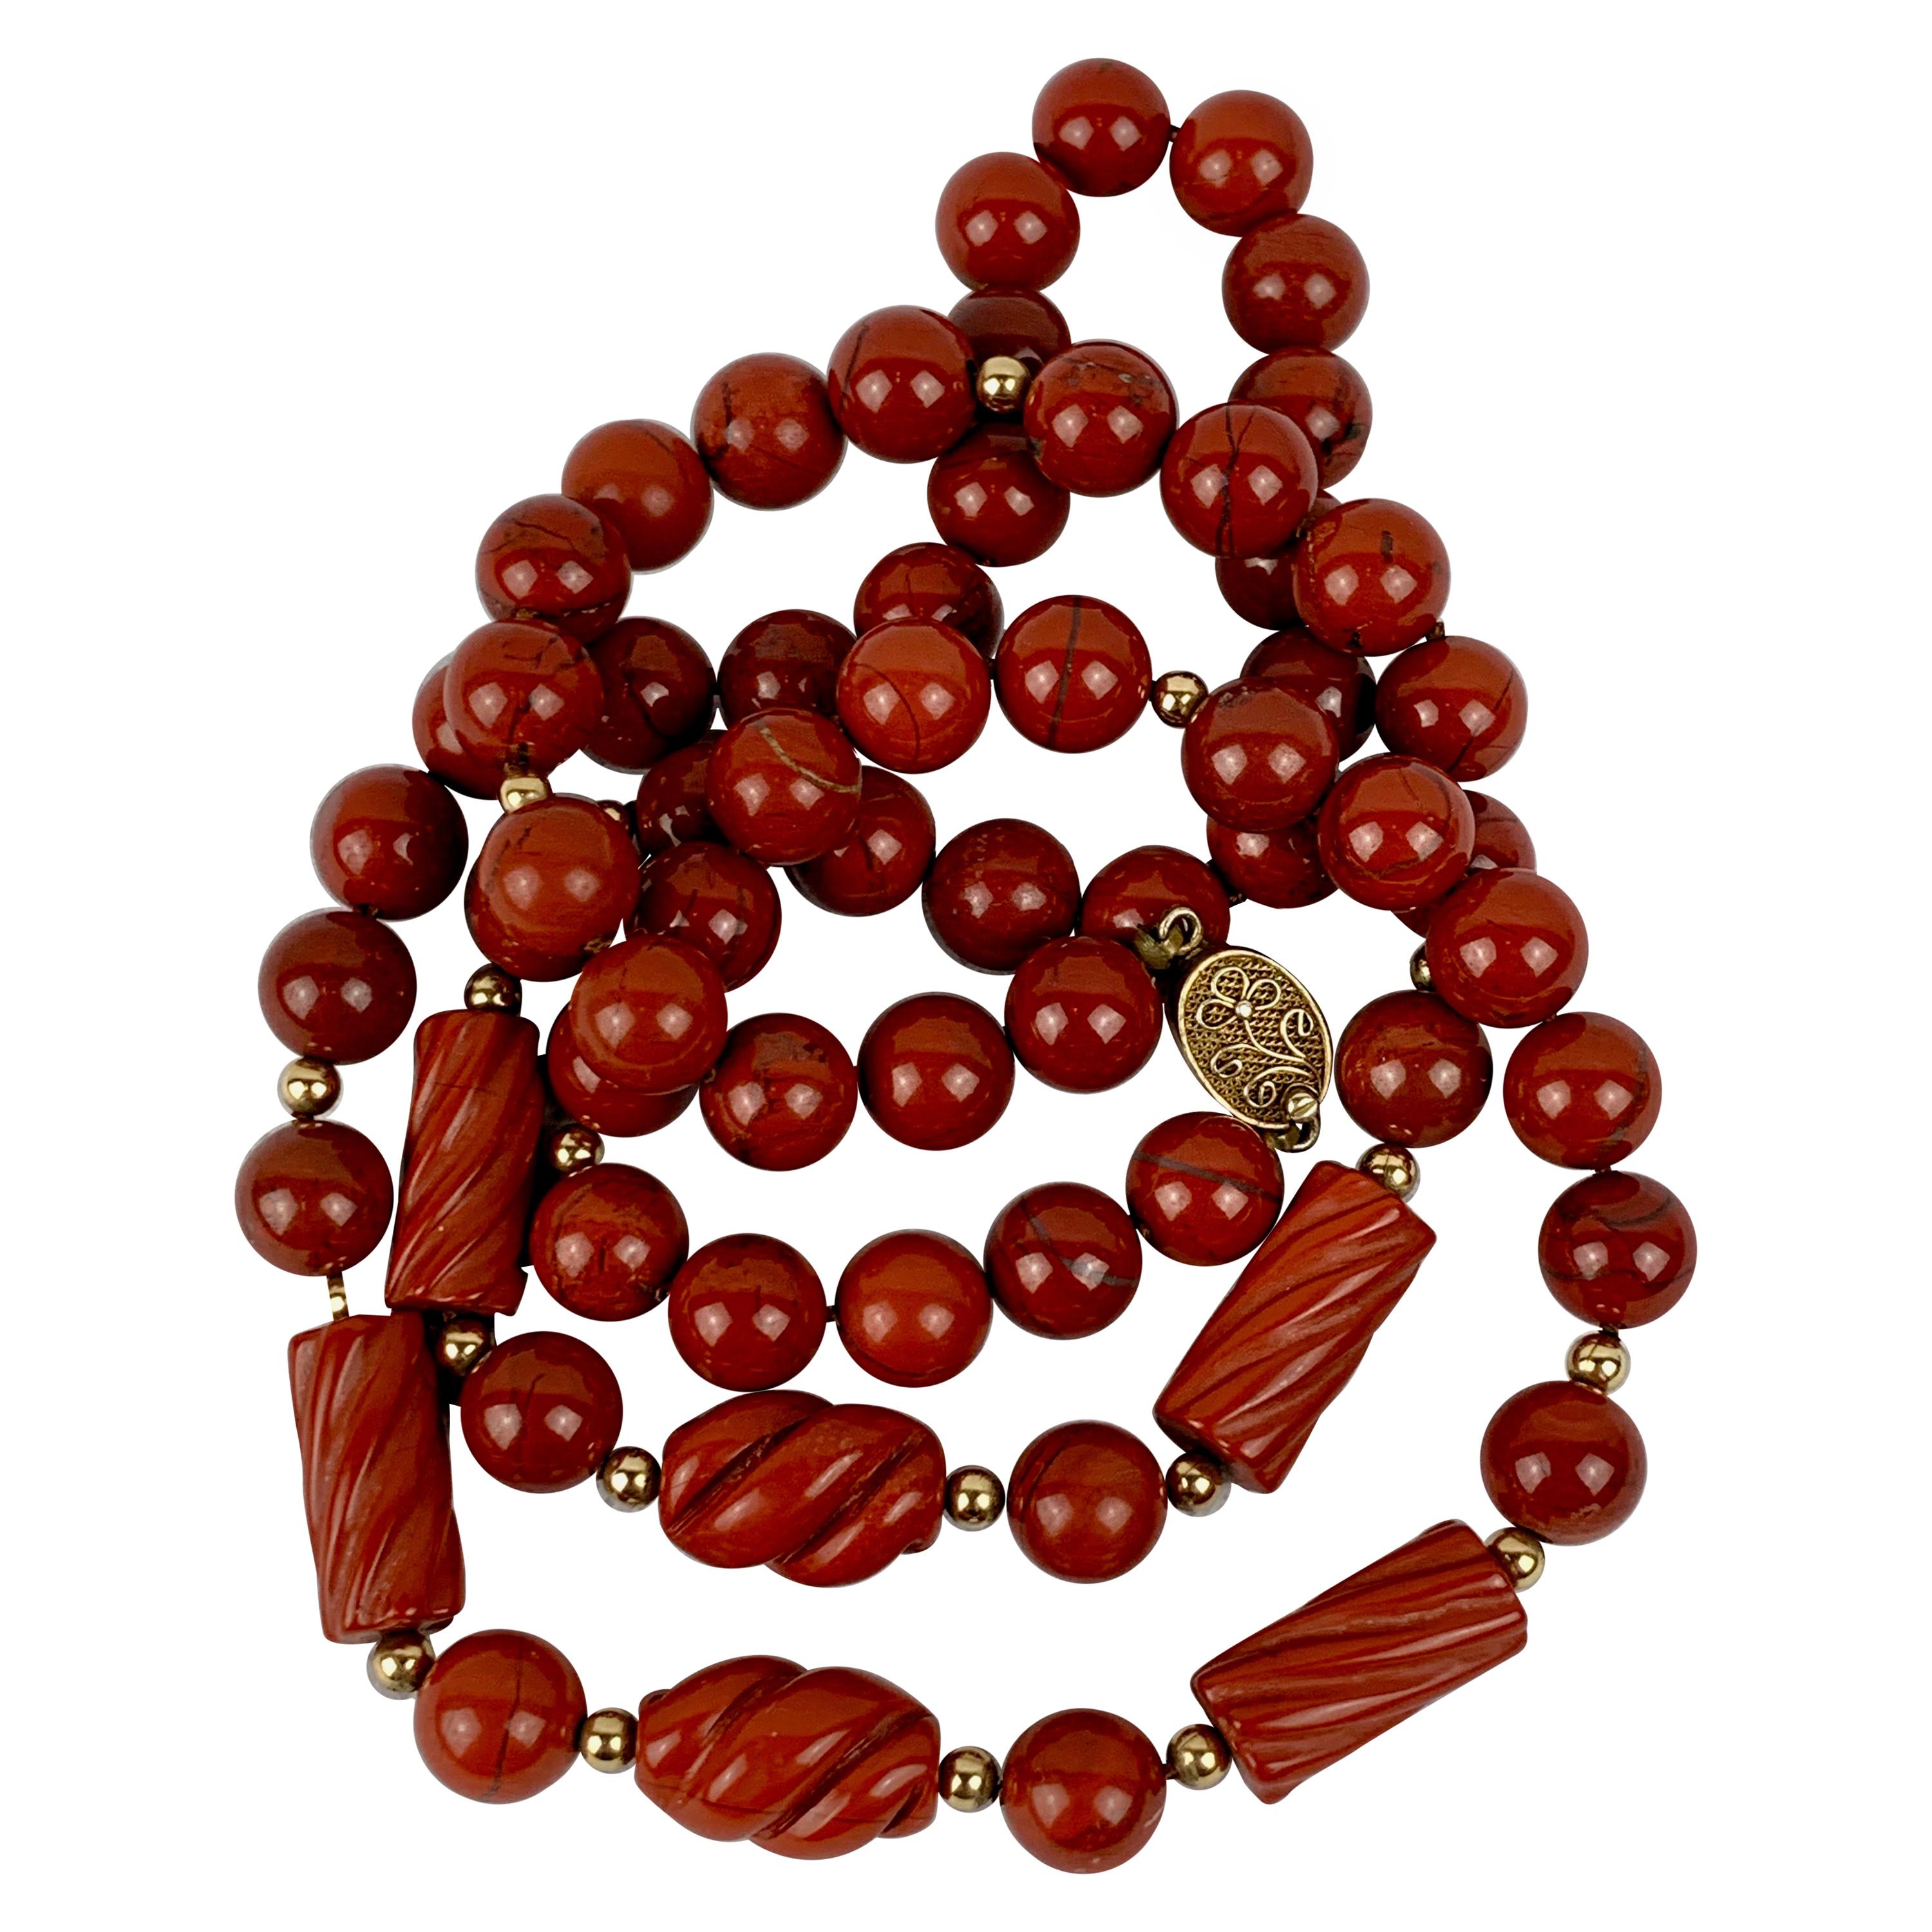  Matched Red Jasper Bead Necklace with 14 Karat Gold Spacers- 31" Long